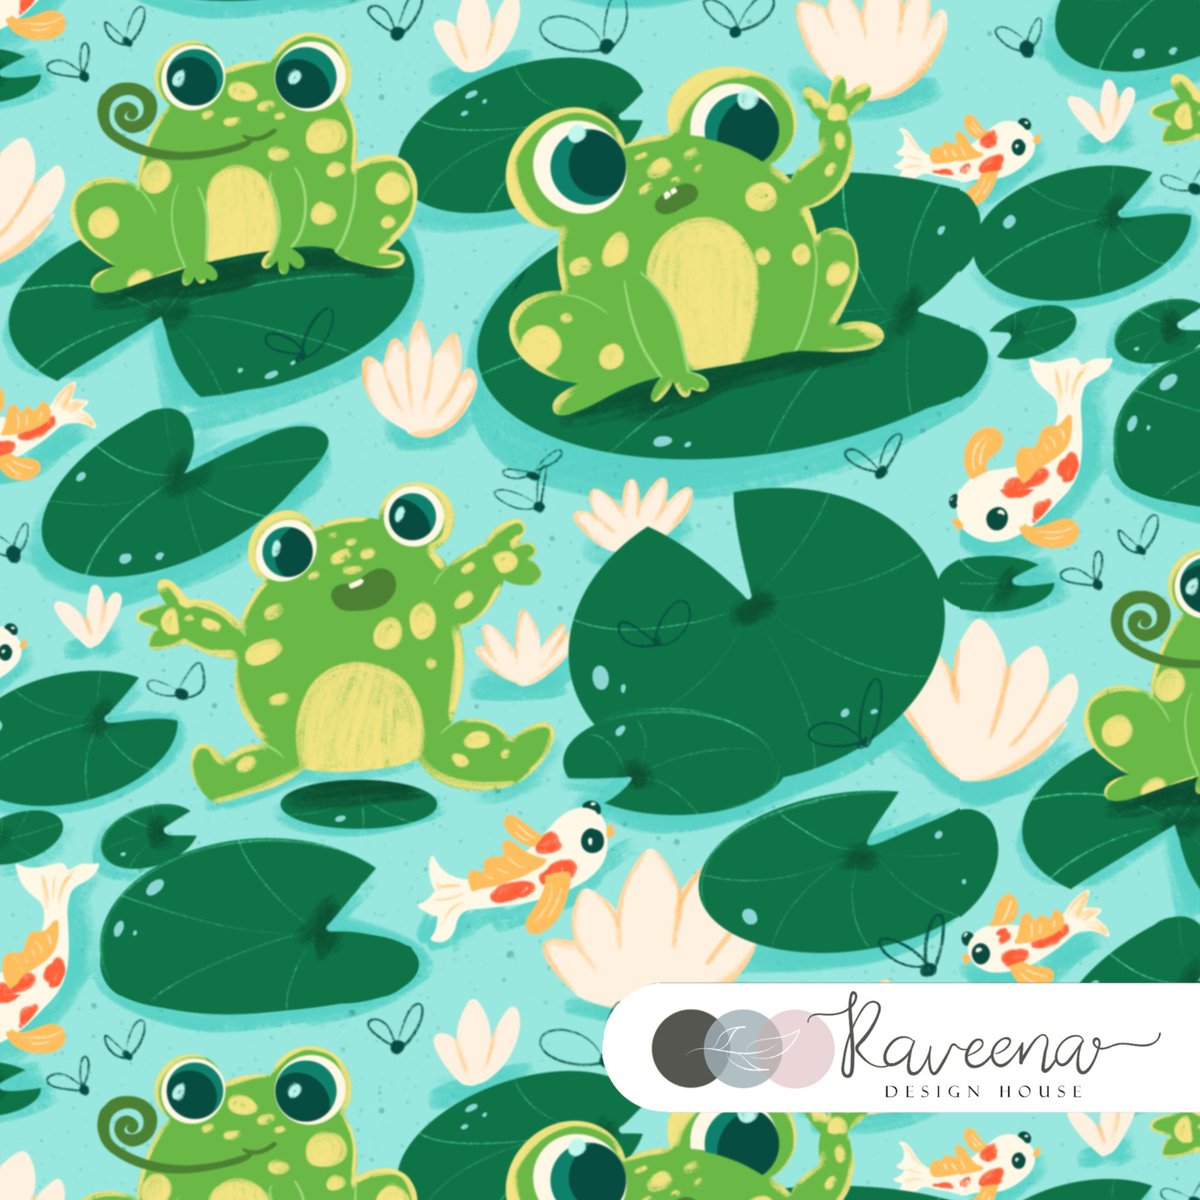 Entry for this week’s #spoonflowerdesignchallenge leap year frog 🐸 

#spoonflowerchallenge I made *_ Mr.Todd breakfast _* 🪰🐸 in fun quirky style. Hope you like it😇

#leapyearfrog #spoonflowerwallpaper #spoonflowerhomedecor #spoonflowerdesigner #spoonflowerfabric #spoonflower